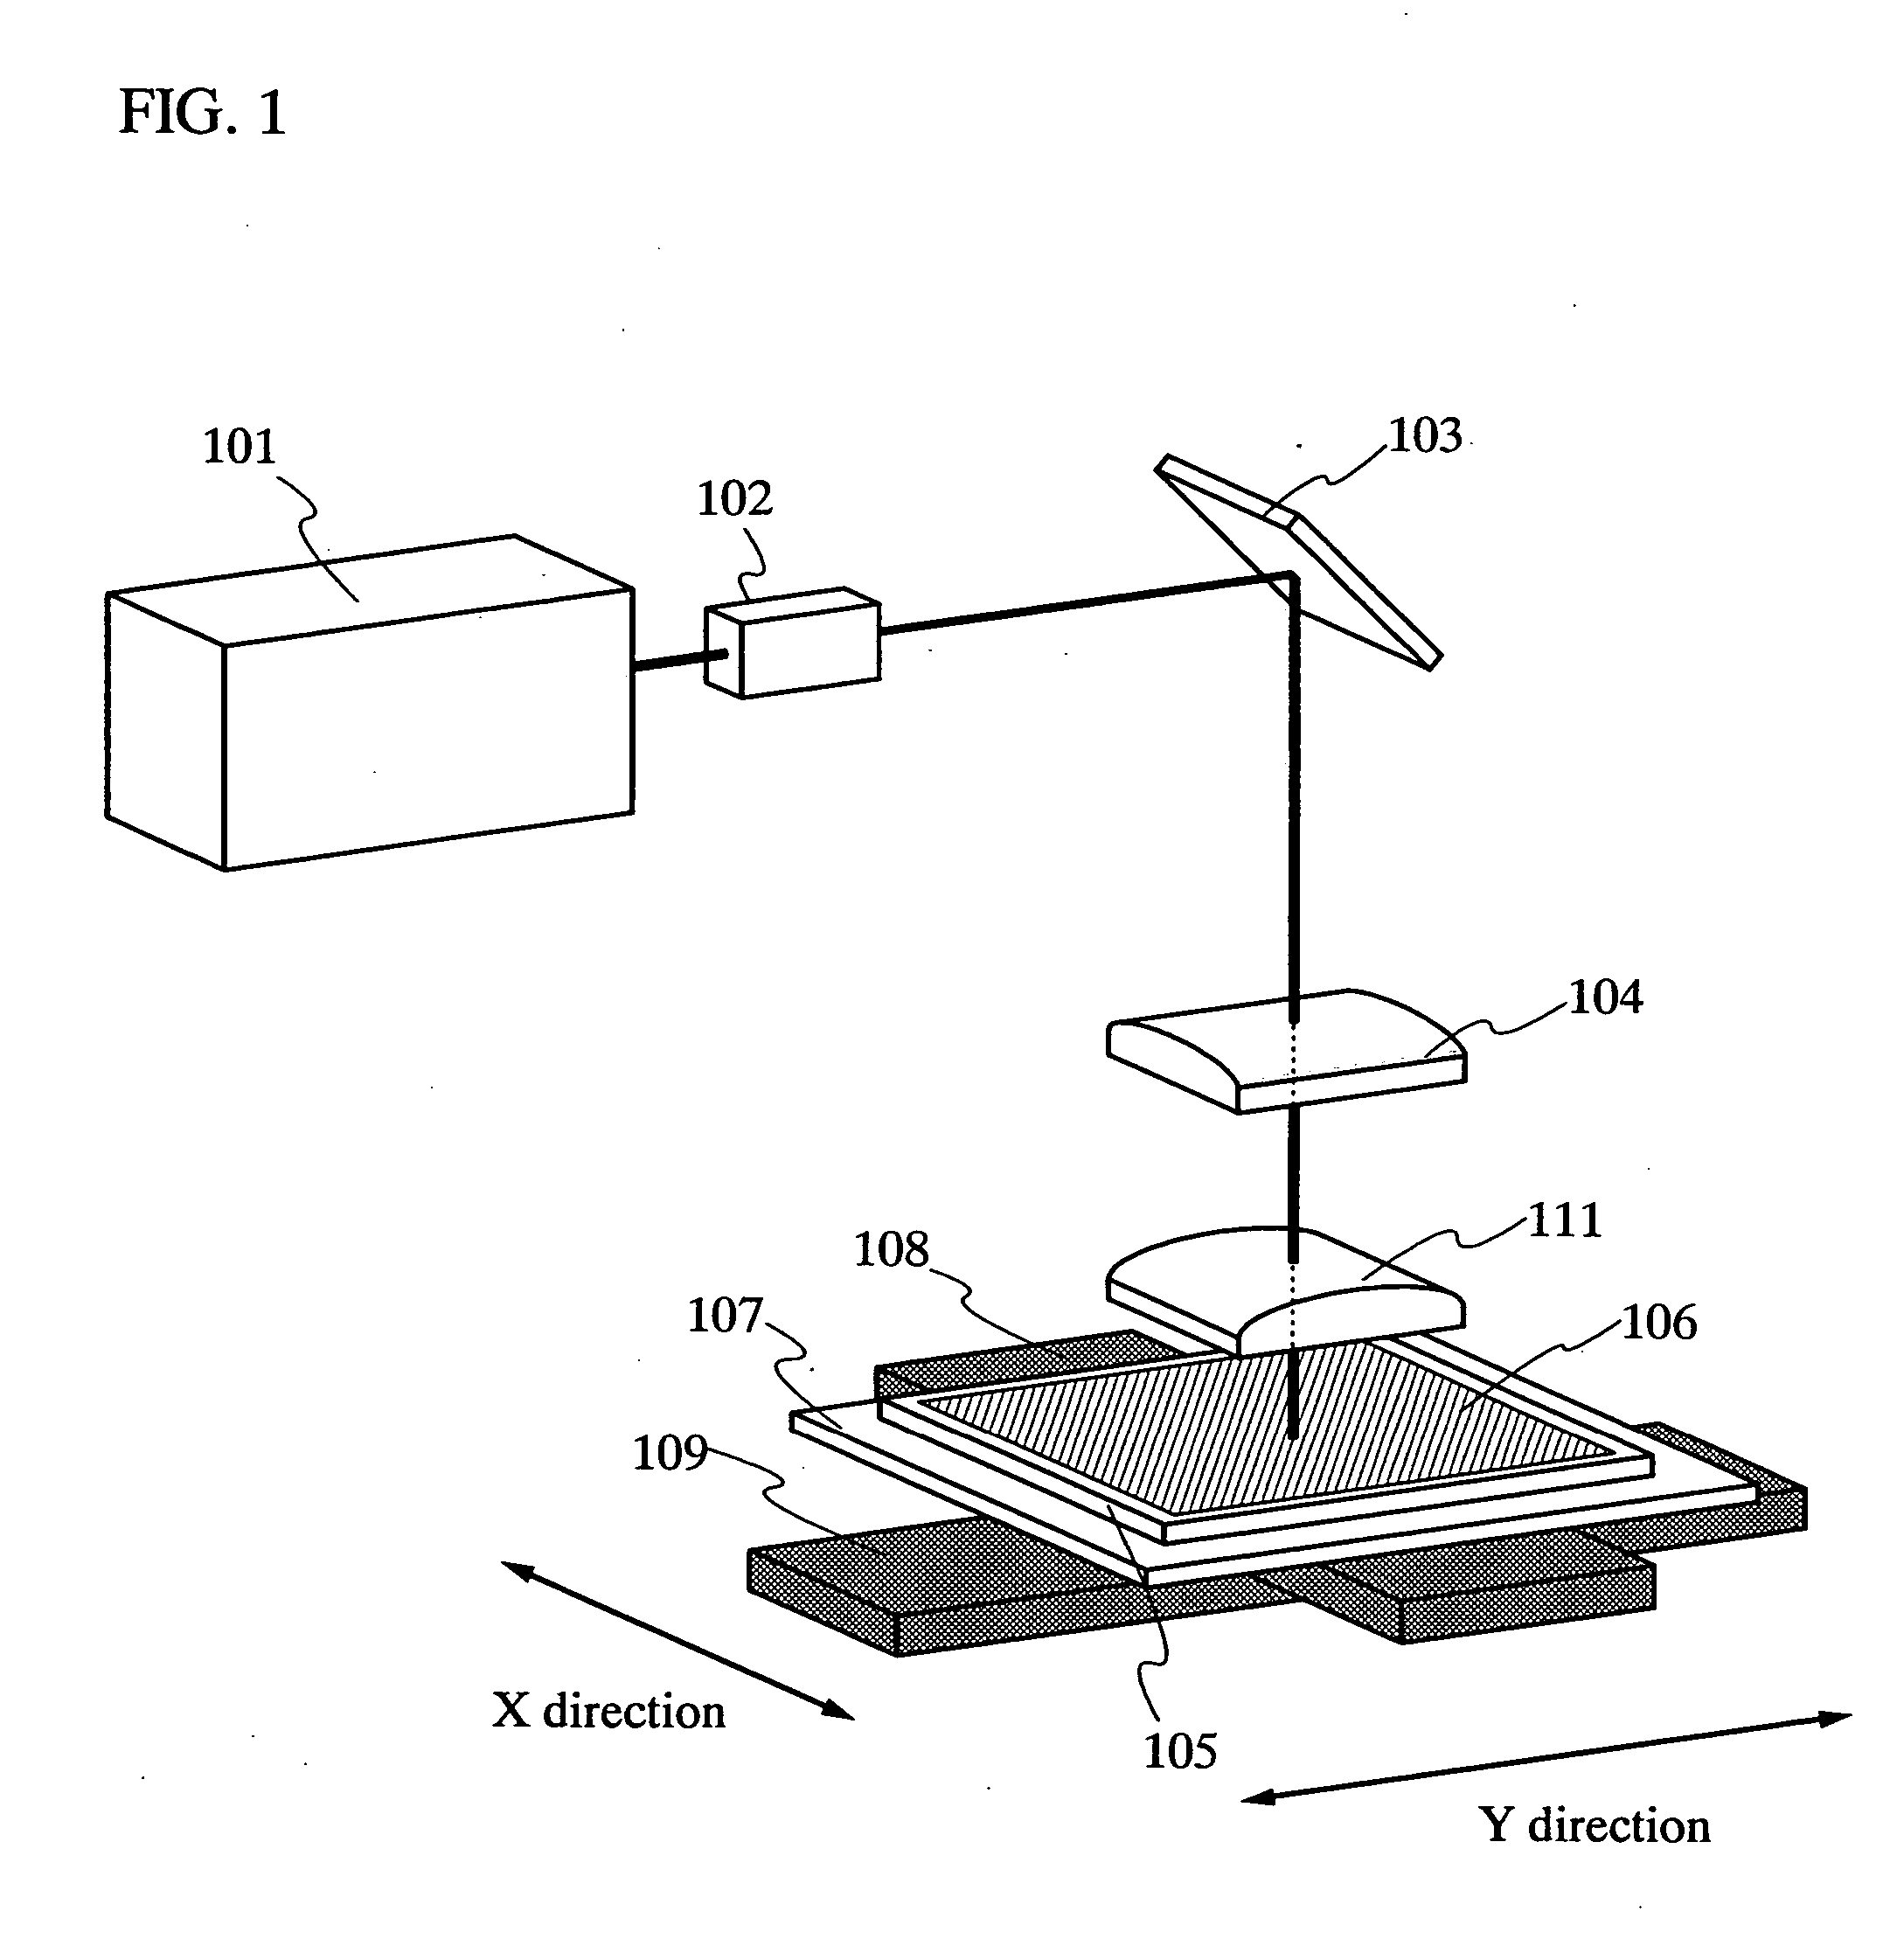 Laser irradiation method and method for manufacturing crystalline semiconductor film